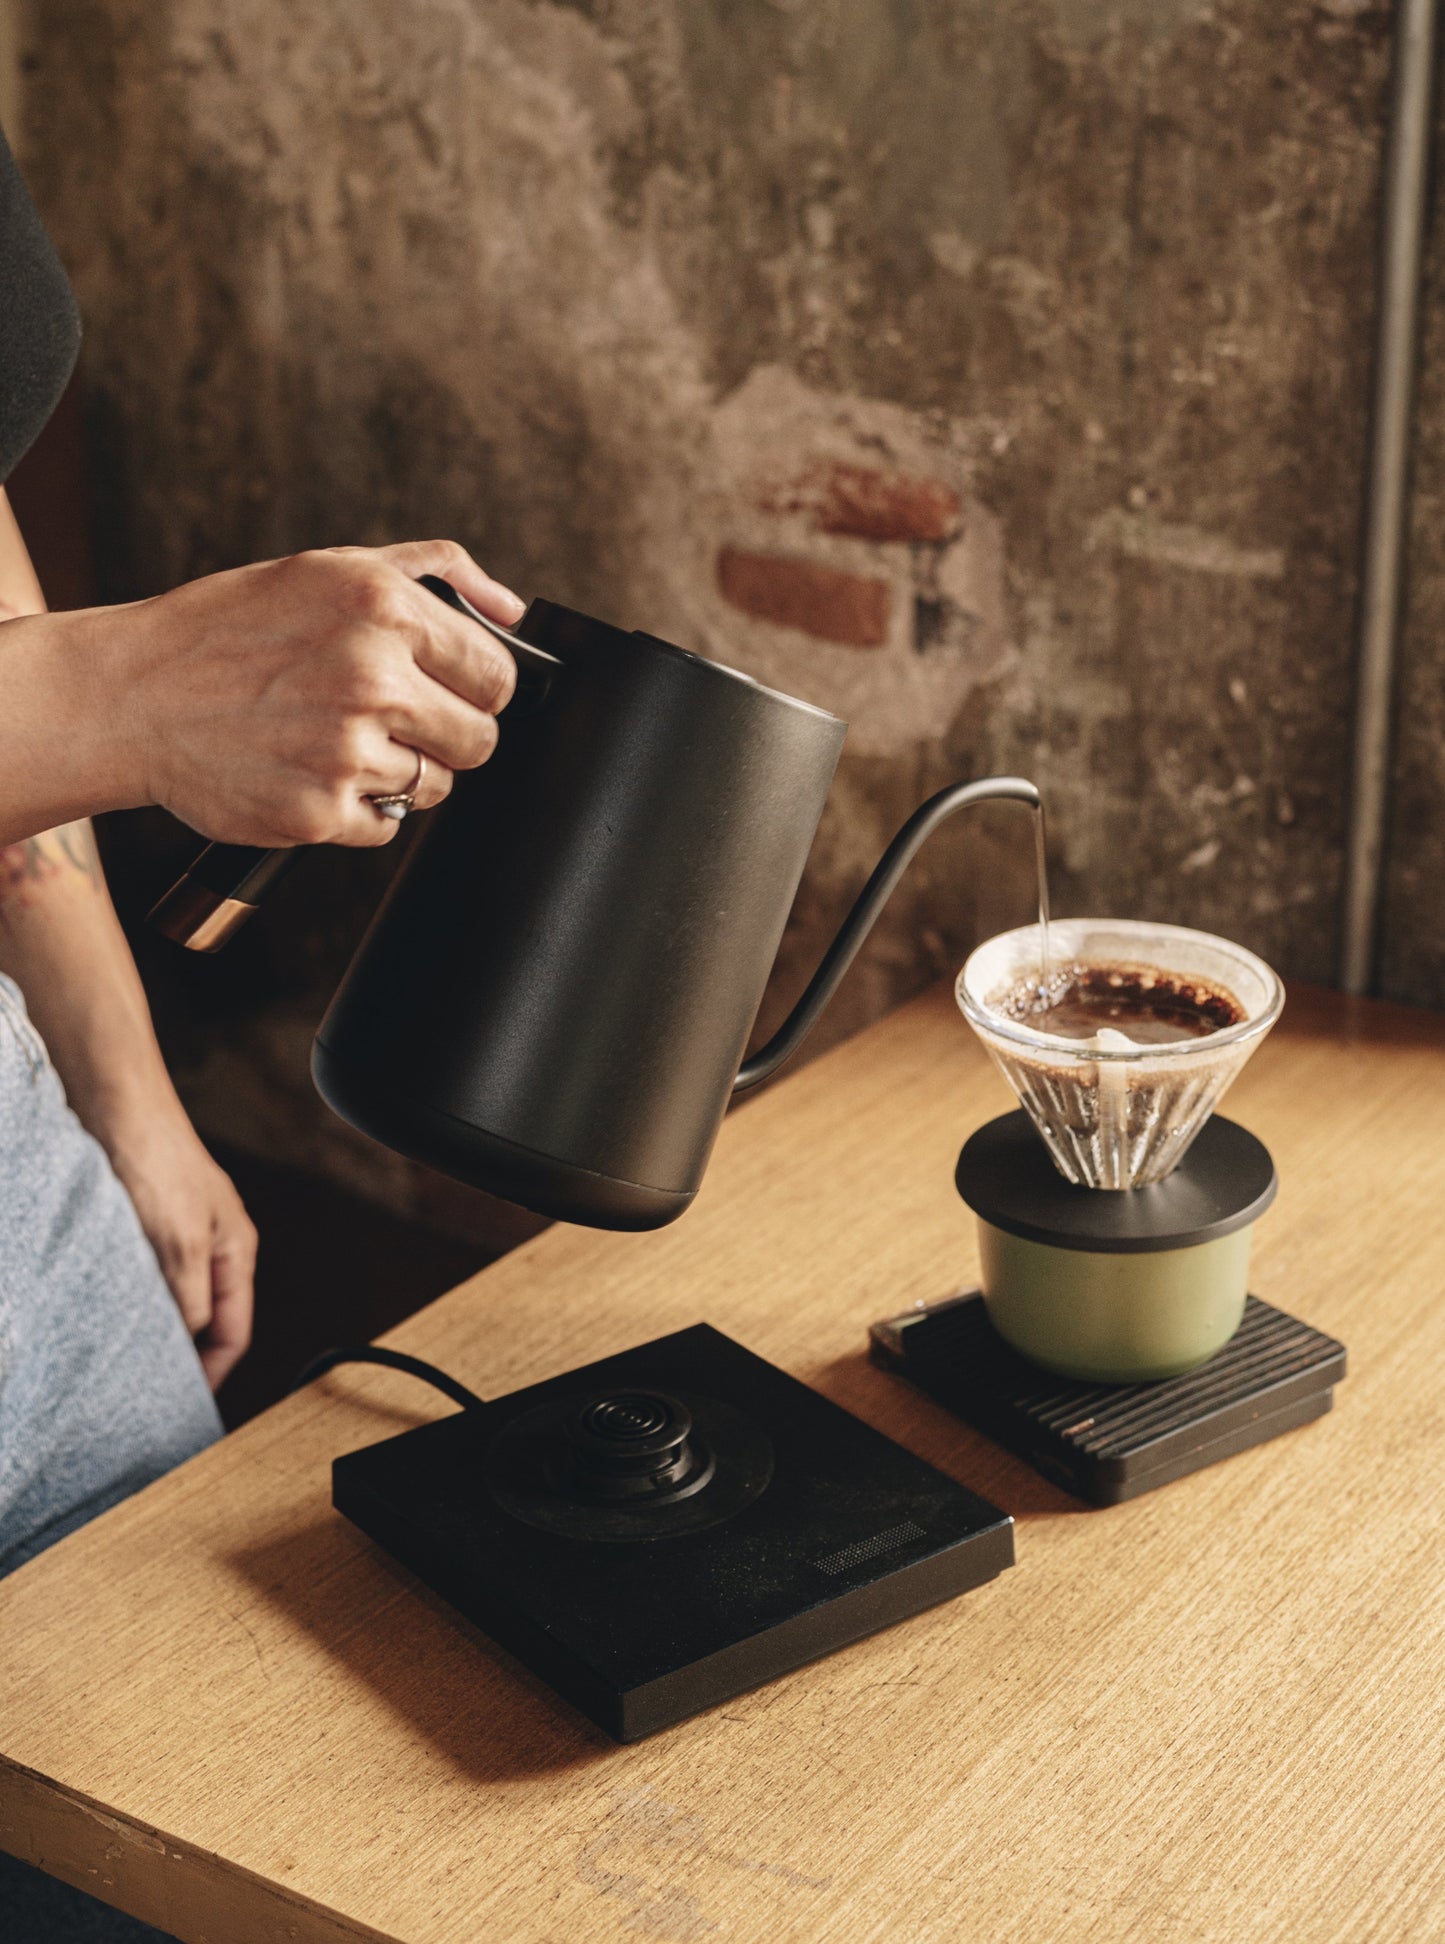 Timemore Fish Electric Pour-over Kettle